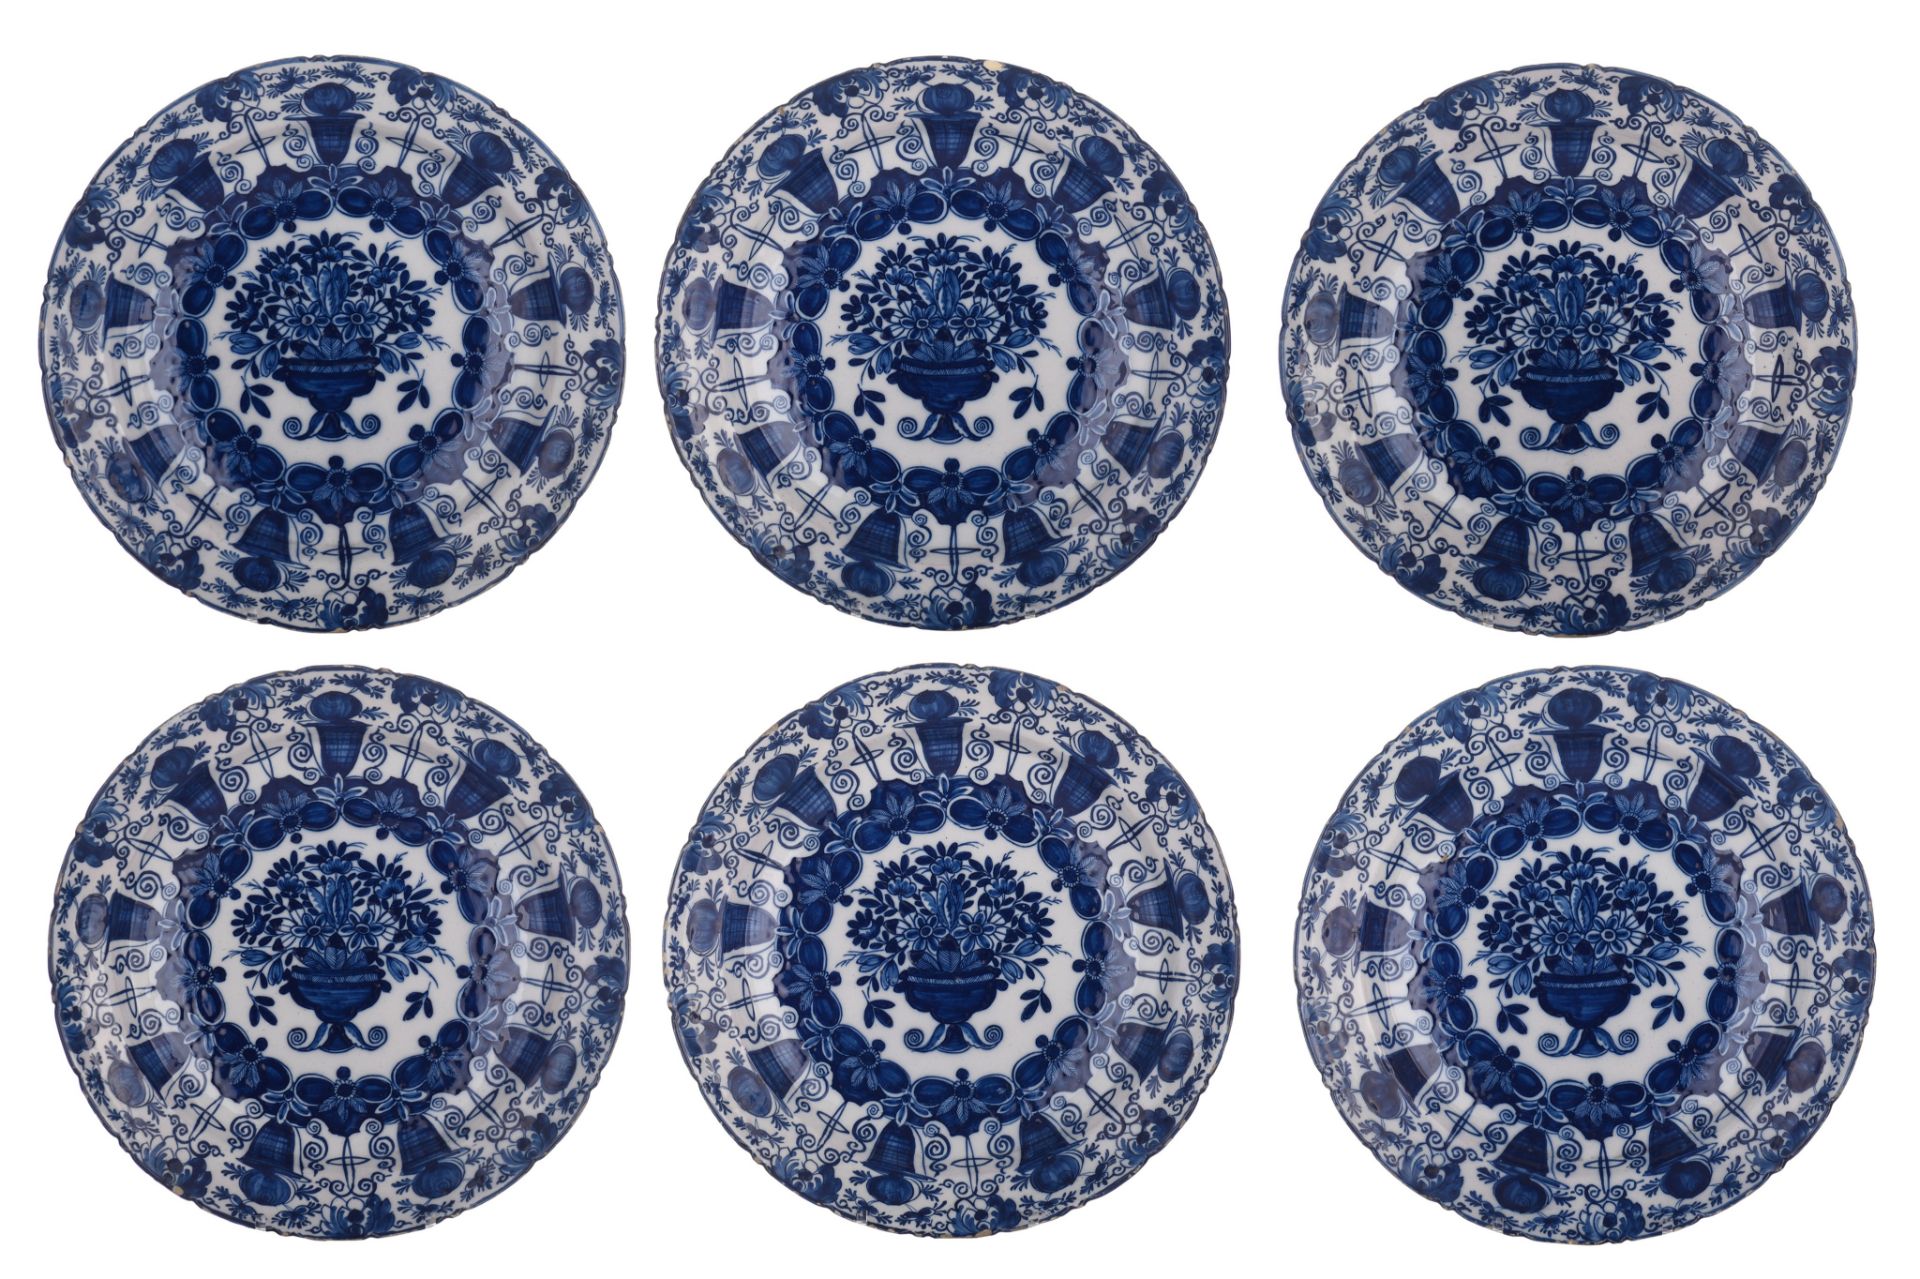 A collection of six Delft blue and white flower basket chargers, marked 'De Klauw', 18thC, ø 35 cm